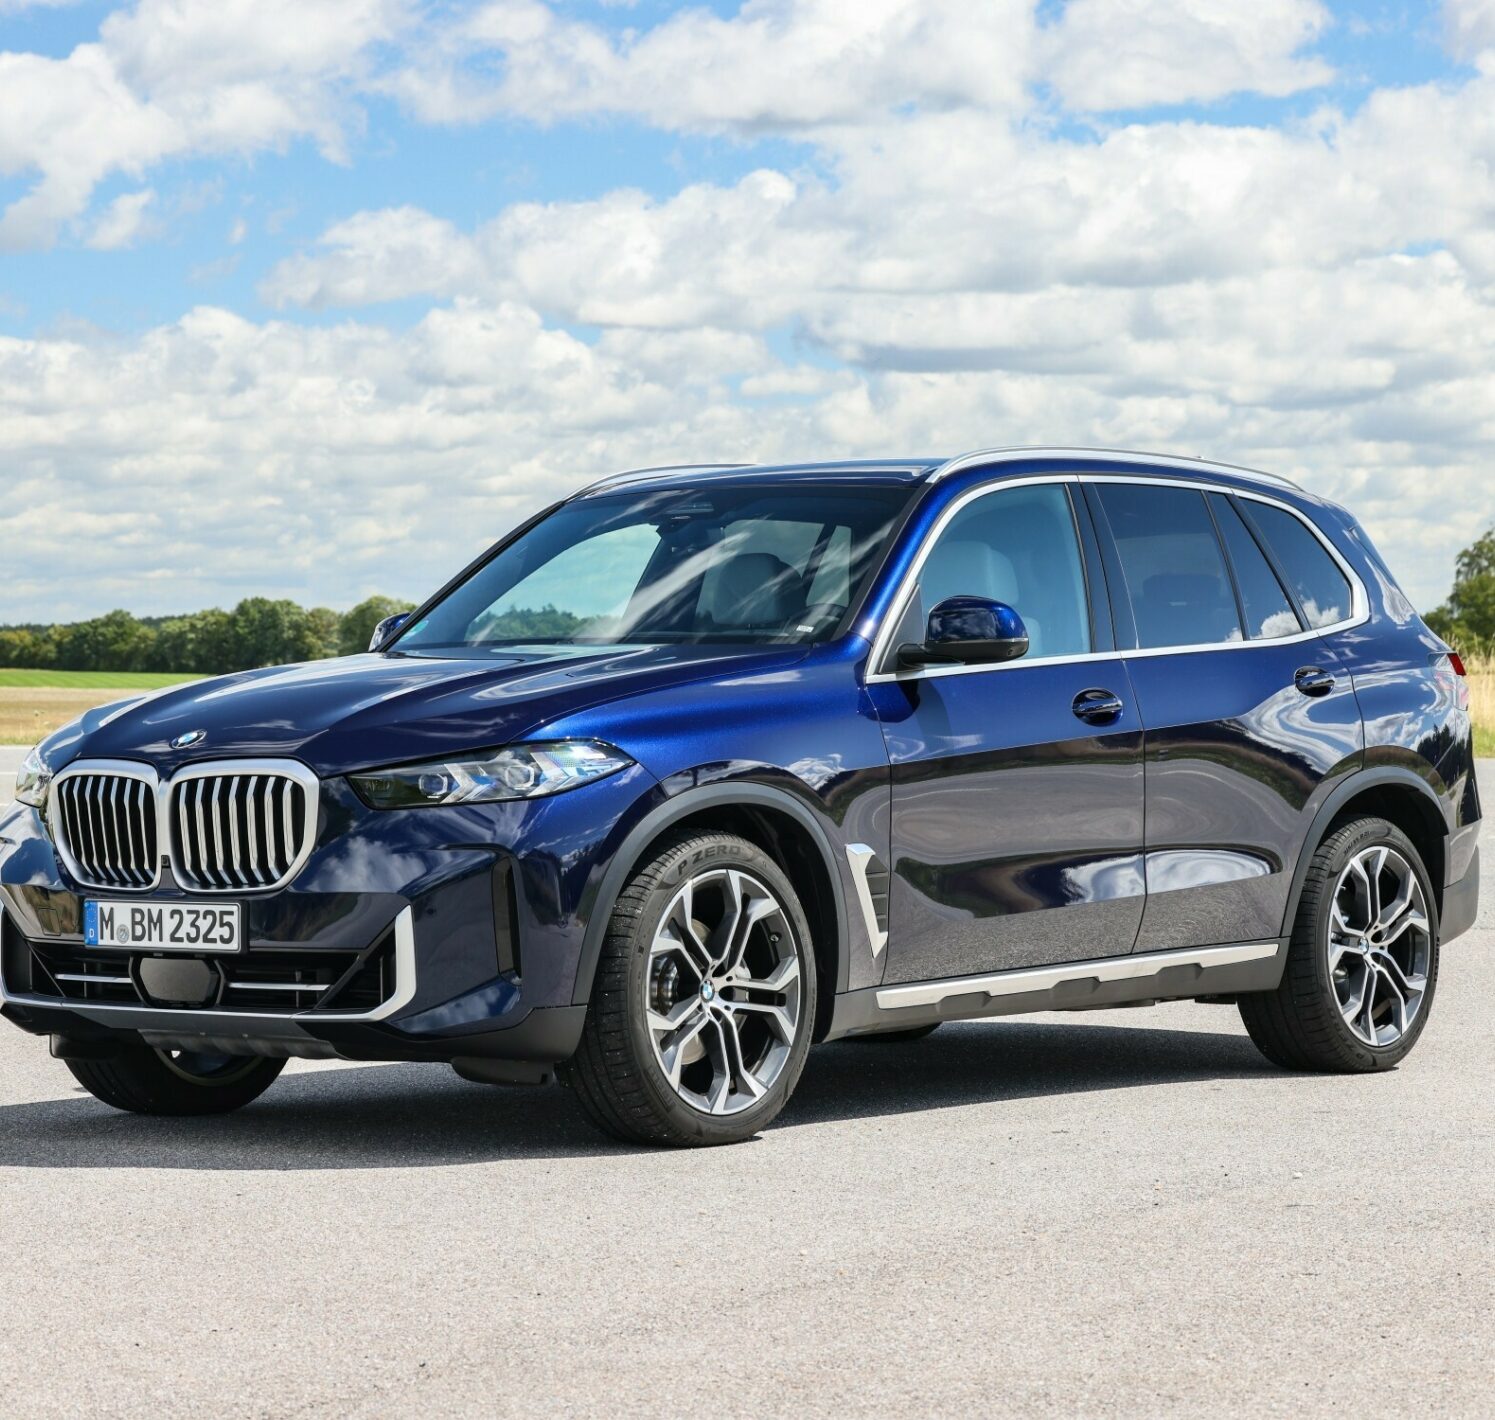 https://autofilter.sk/assets/images/x5/gallery/P90518130_lowRes_the-new-bmw-x5-08-23.jpg - obrazok